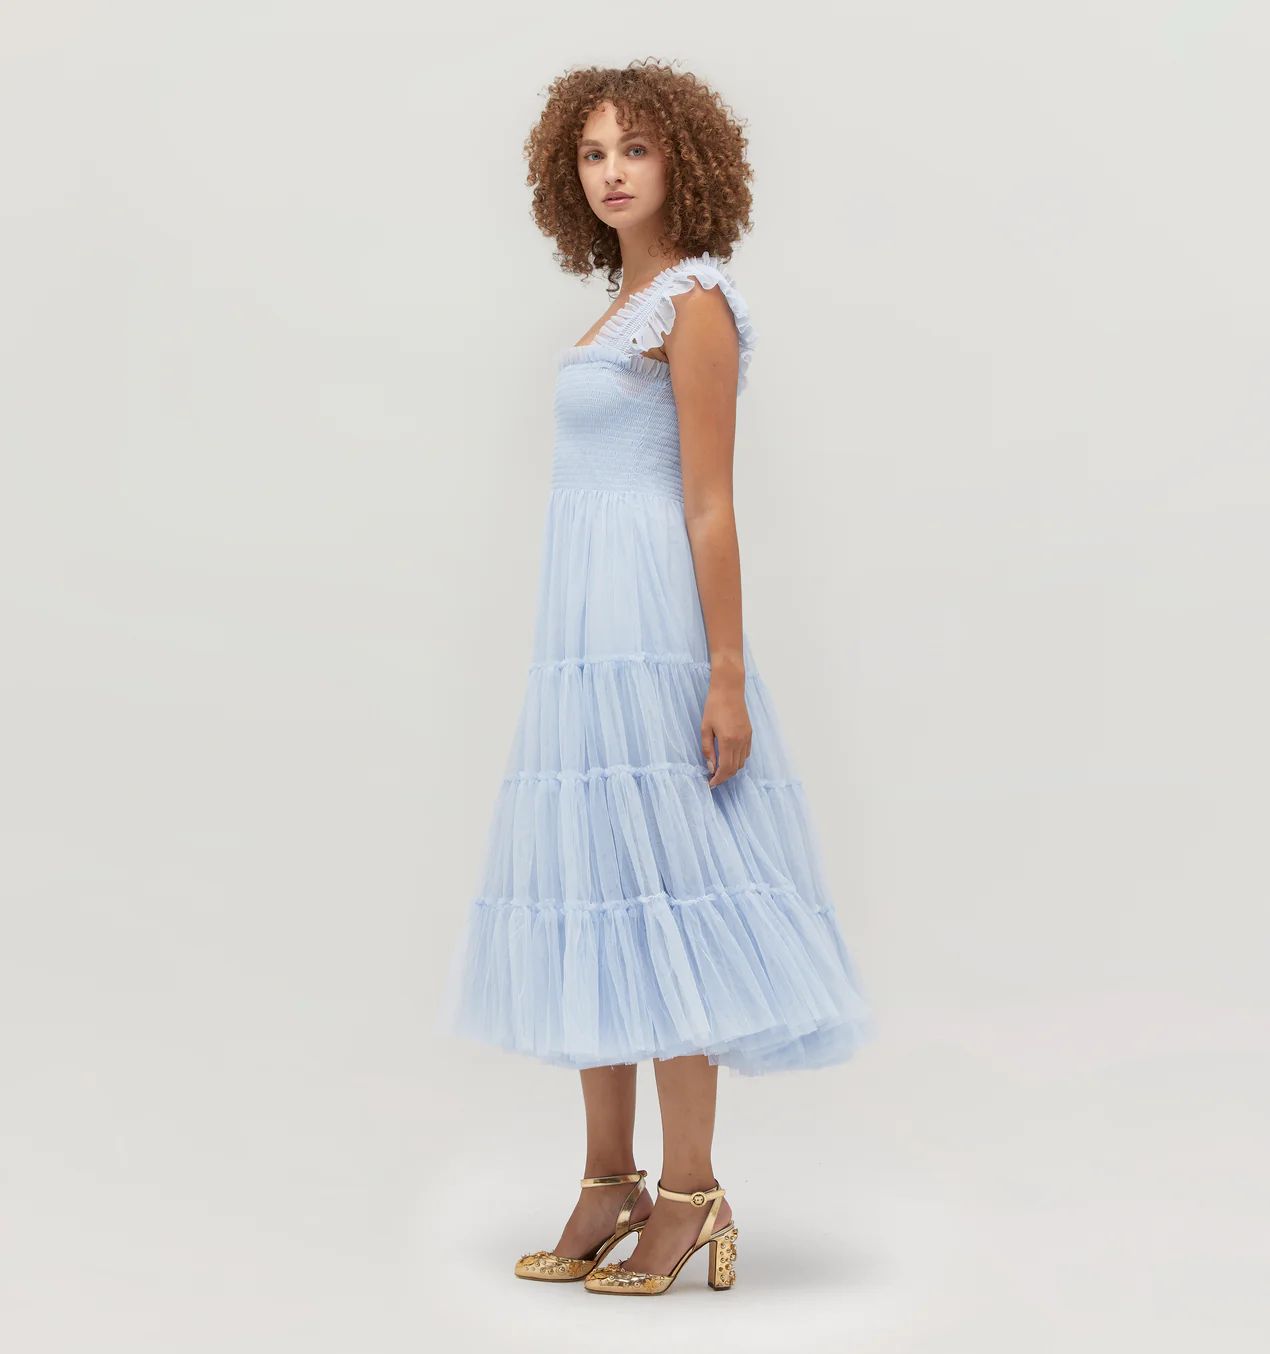 The Tulle Ellie Nap Dress - Powder Blue Tulle | Hill House Home